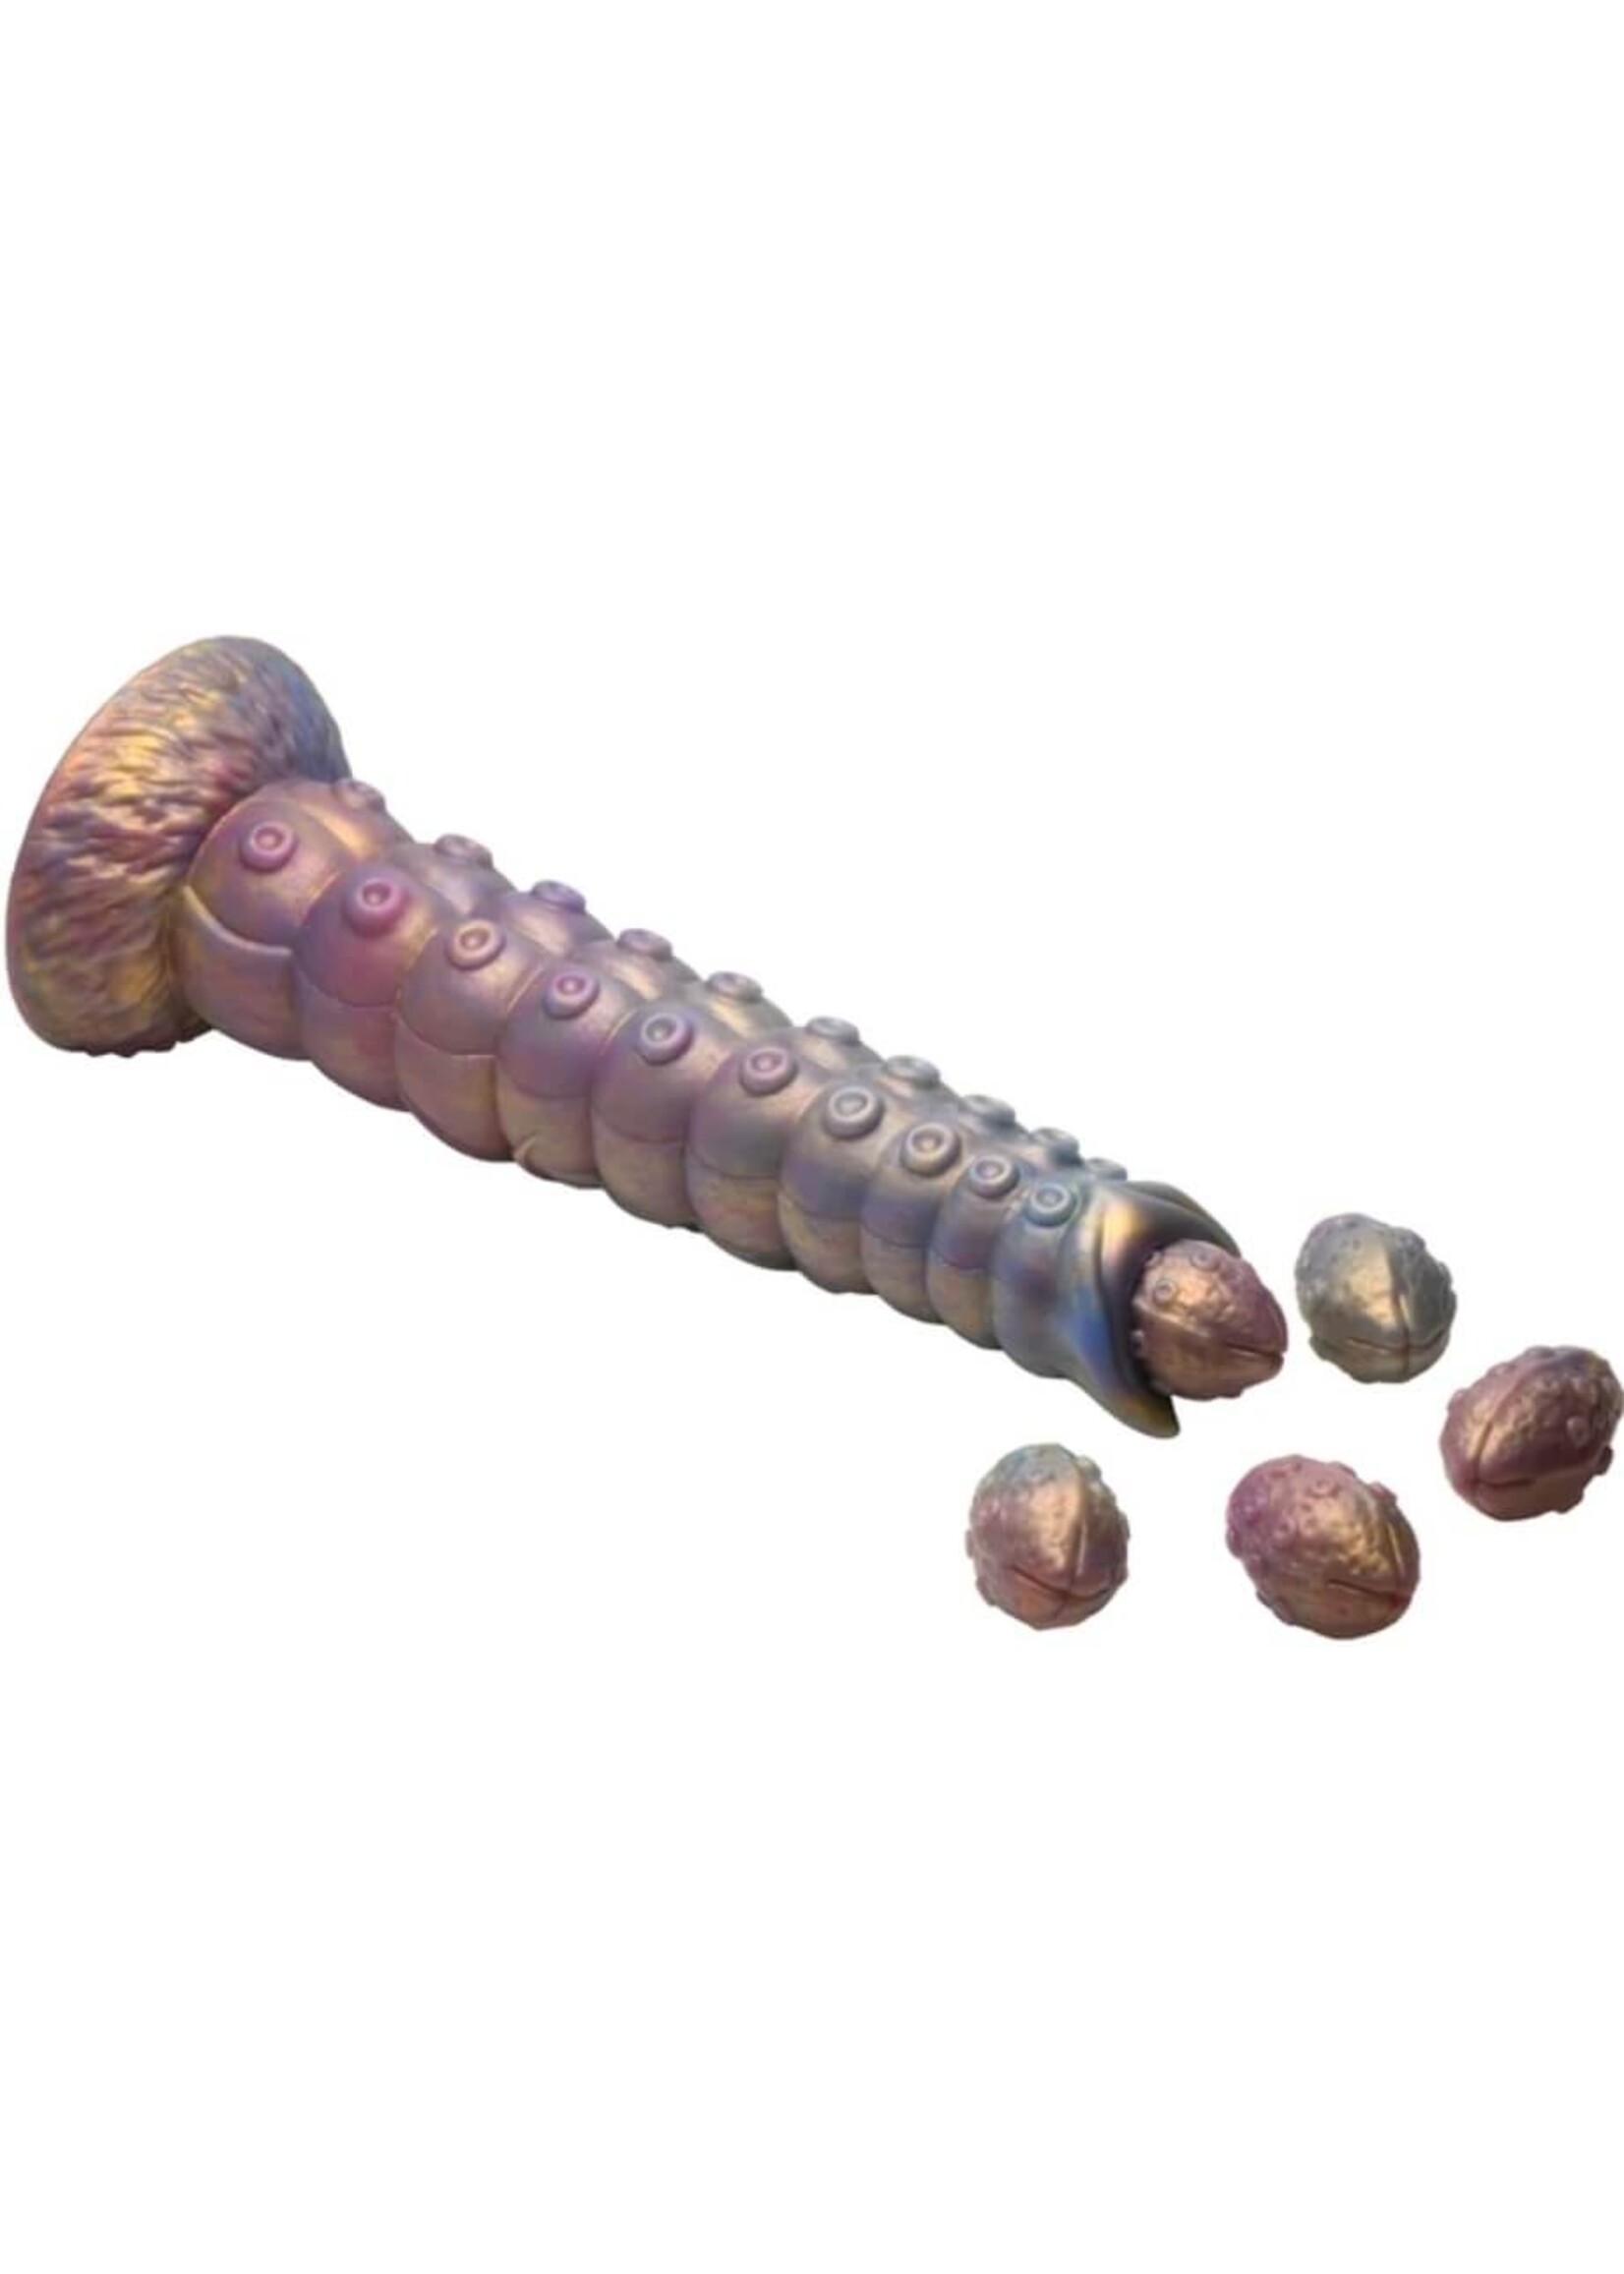 Deep Invader Tentacle Ovipositor Silicone Dildo w/Eggs